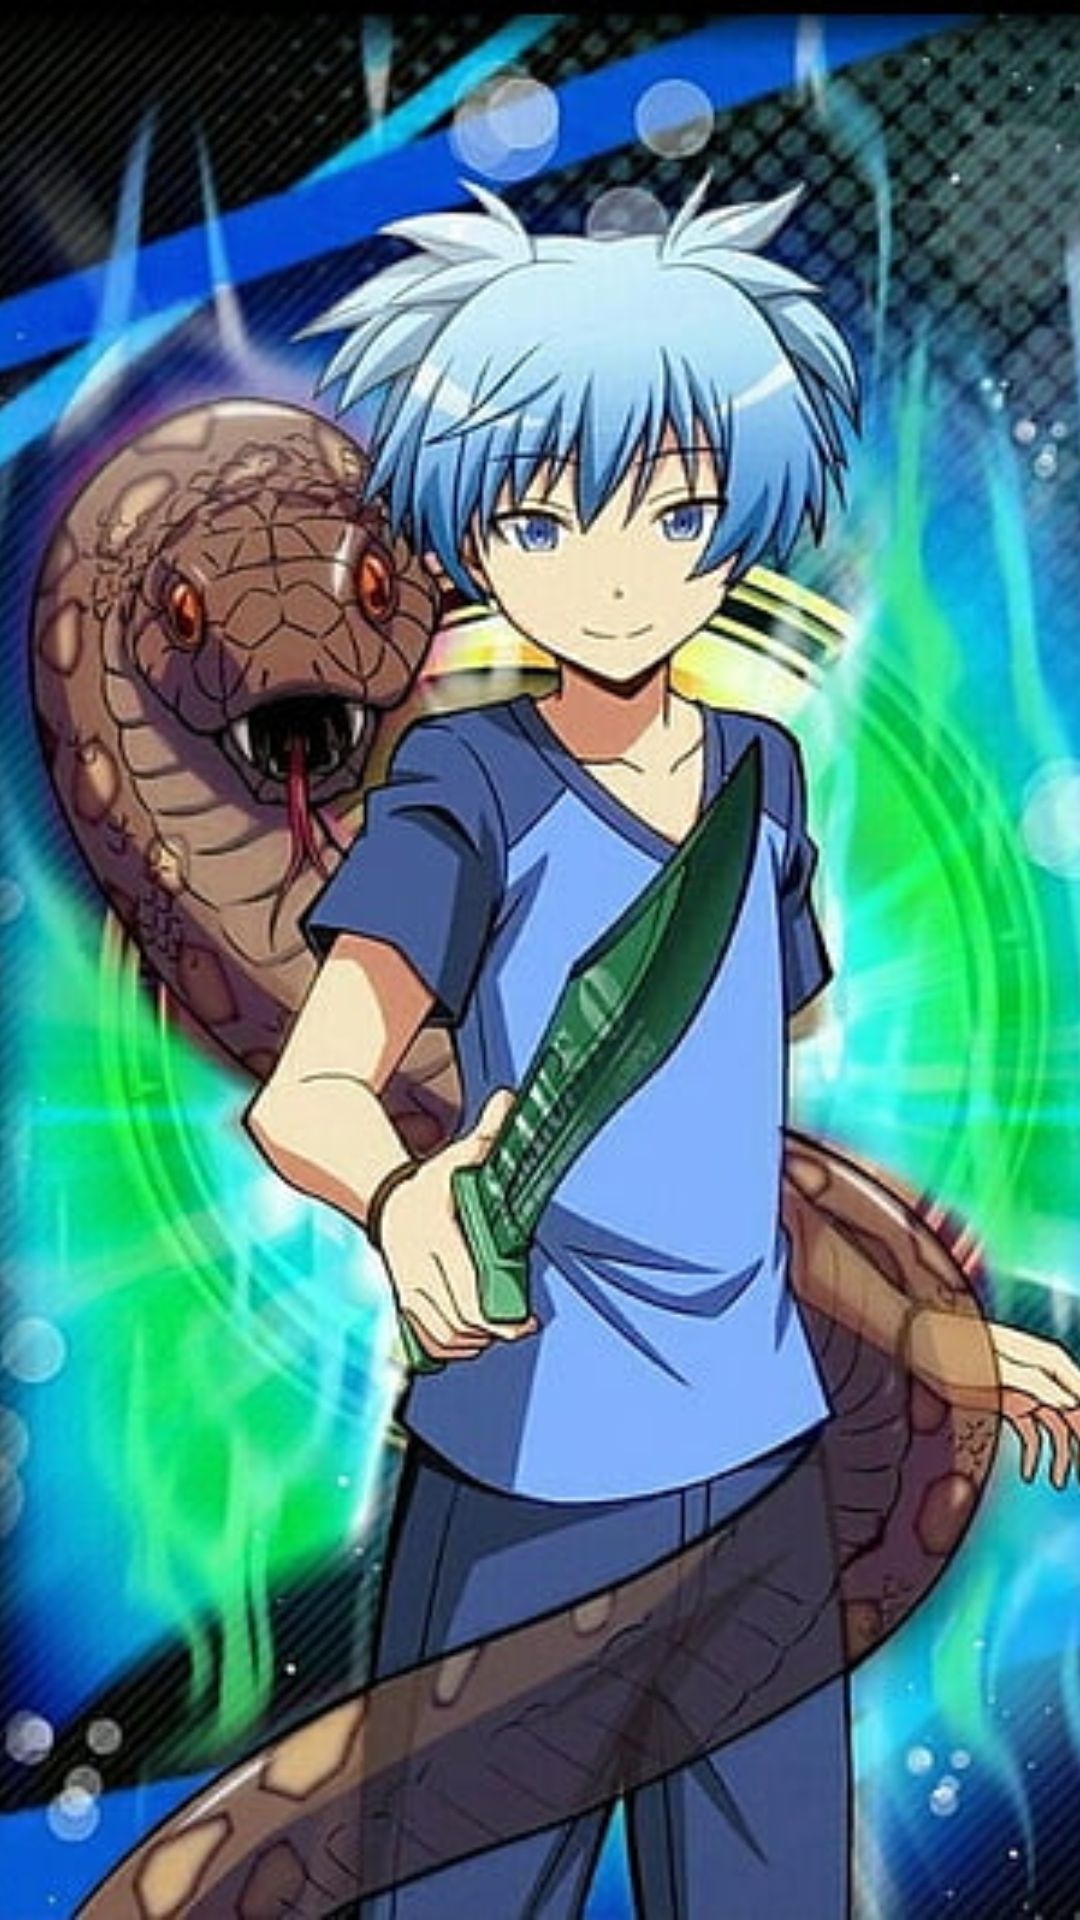 Assassination Classroom wallpapers, Desktop to mobile art, High-quality backgrounds, Engaging visuals, 1080x1920 Full HD Phone